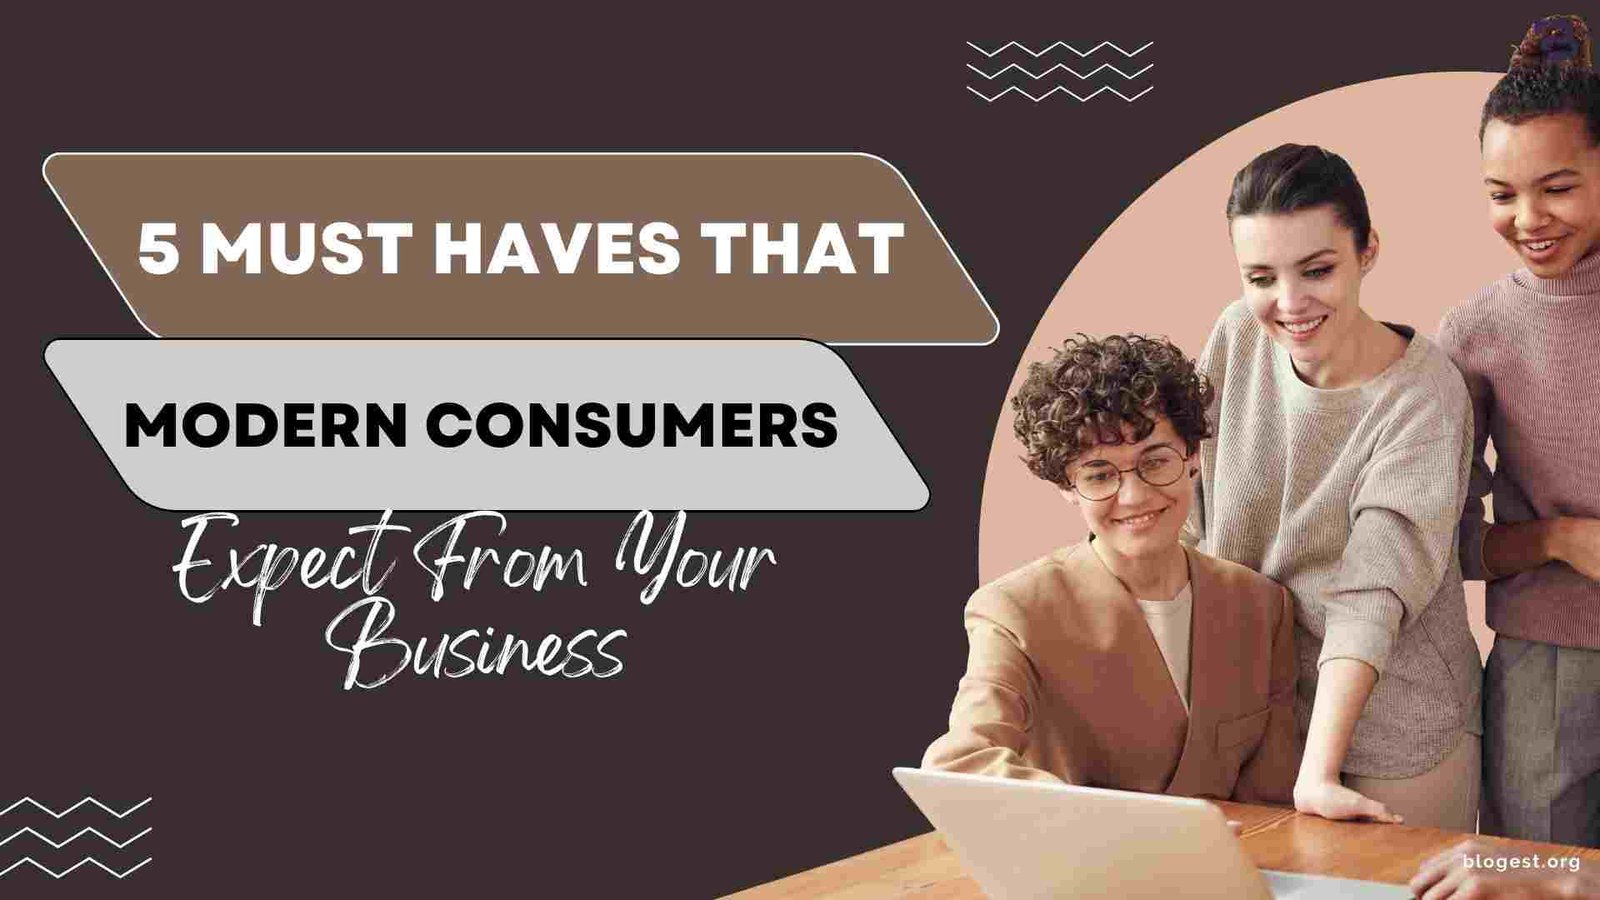 5 Must Haves That Modern Consumers Expect From Your Business